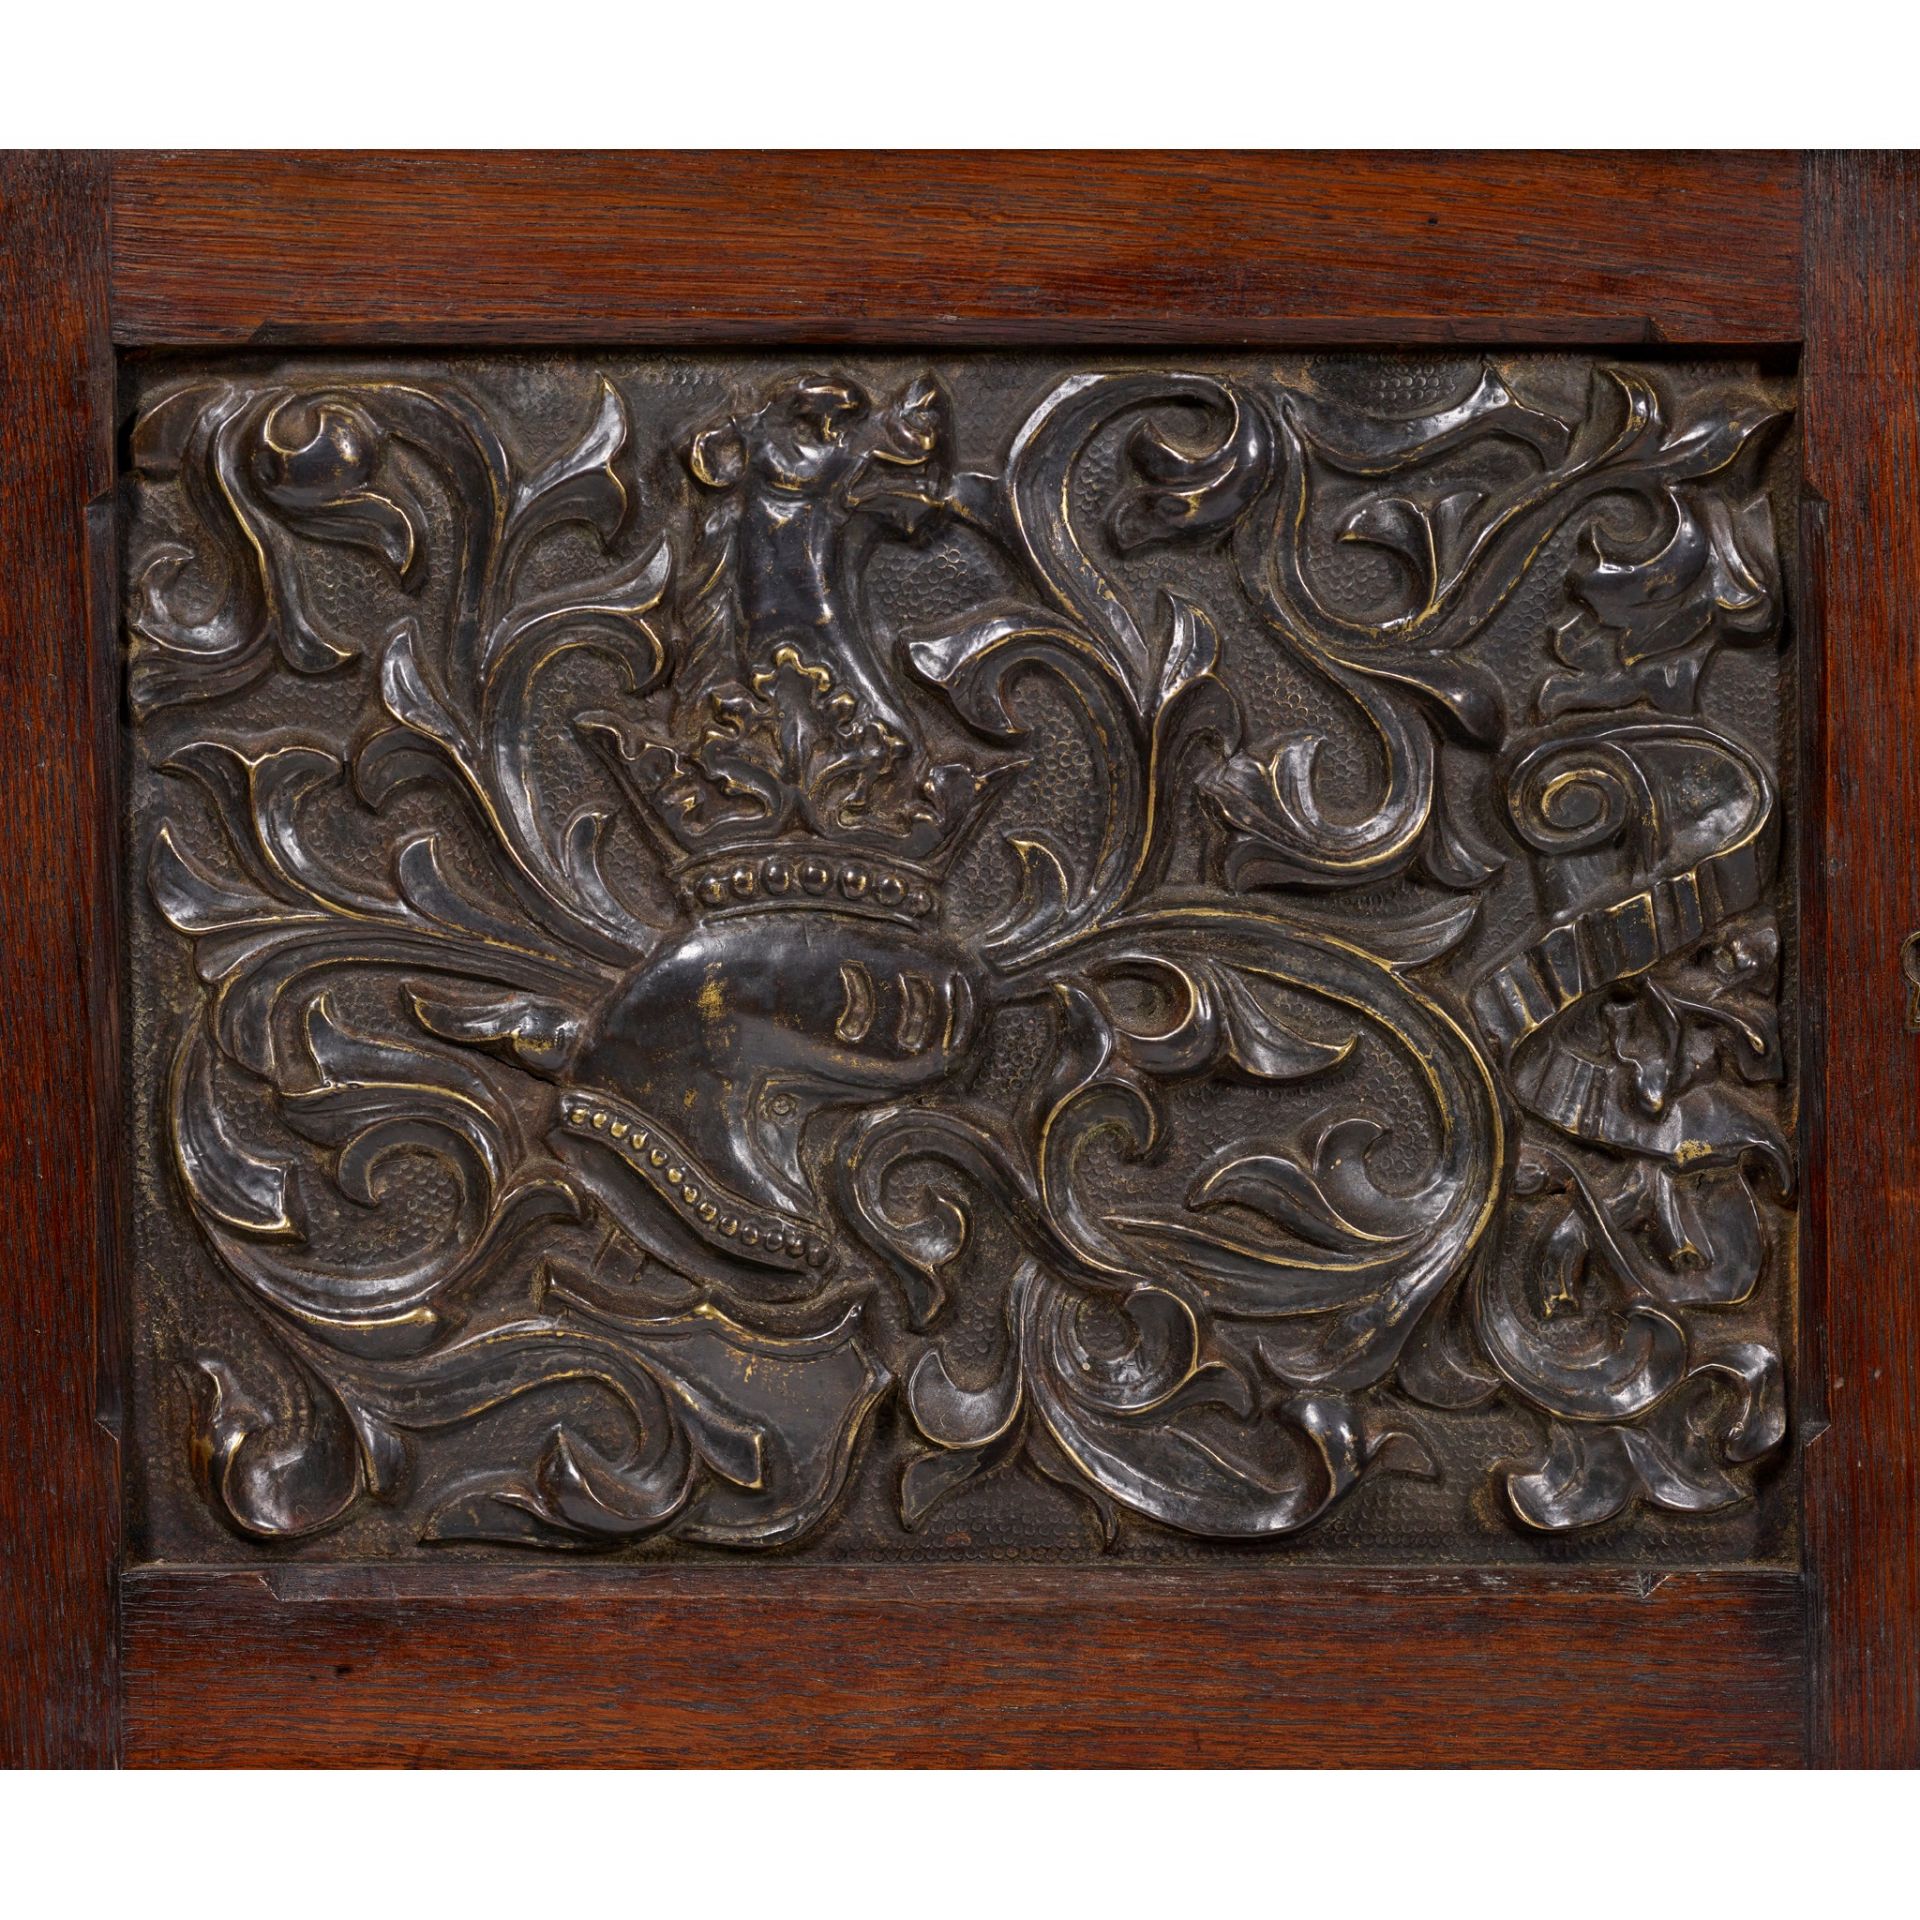 COX & SONS, LONDON (ATTRIBUTED MAKER) GOTHIC REVIVAL SIDE CABINET, CIRCA 1870 - Image 3 of 10